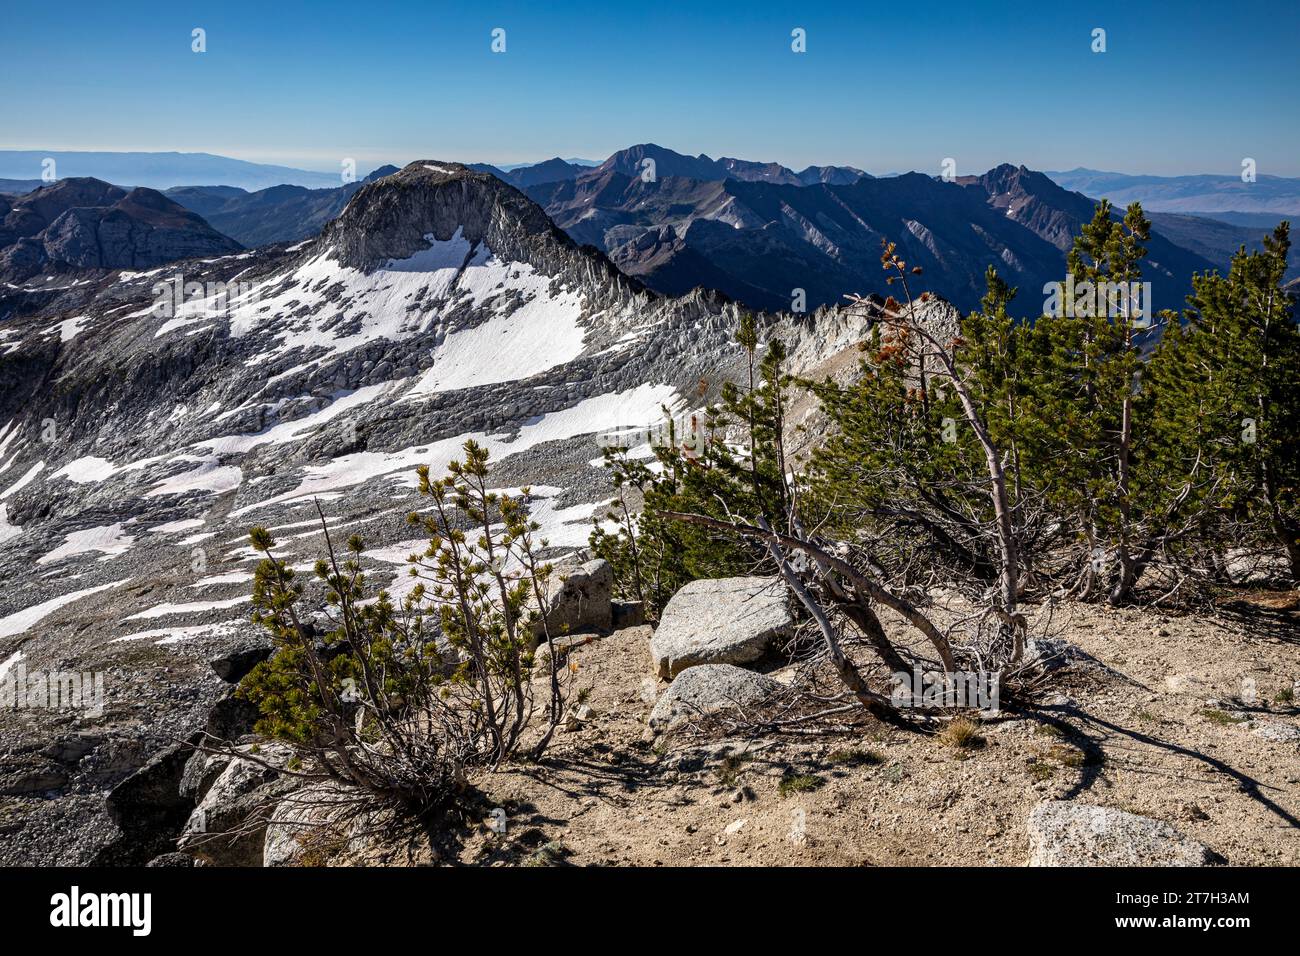 OR02736-00...OREGON - Overlooking the Glacier Lake Basin and the Wallowa Mountains from the summit of Eagle Cap in the Eagle Cap Wilderness. Stock Photo